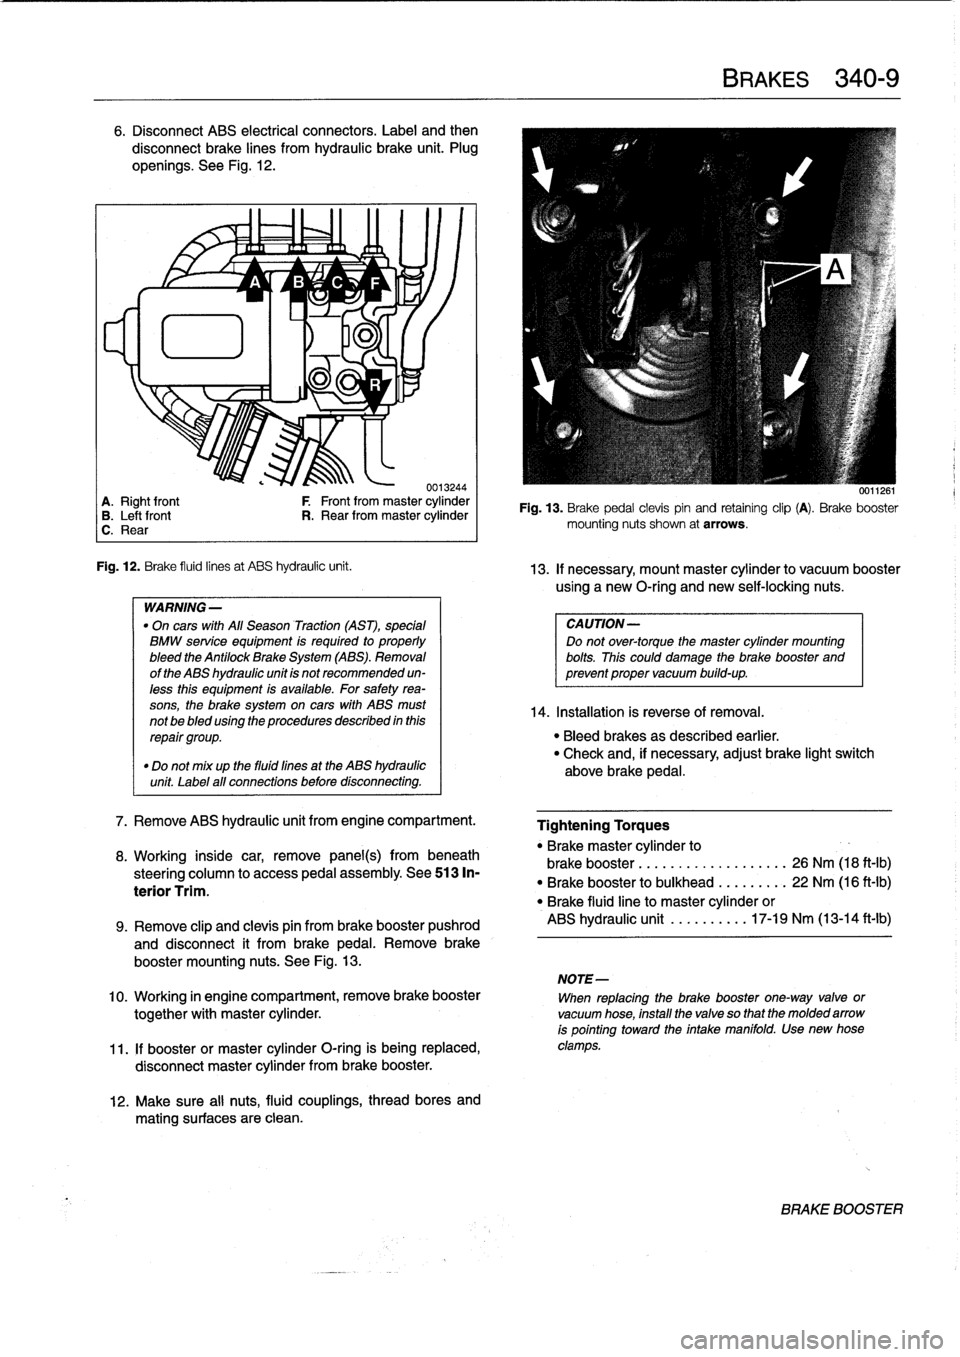 BMW 323i 1995 E36 Owners Guide 6
.
Disconnect
ABS
electrical
connectors
.
Label
and
then

disconnect
brake
lines
from
hydraulic
brake
unit
.
Plug

openíngs
.
See
Fig
.
12
.

~
~
A
1/
B
1v
C
~
F

lu
11
-ri
J
.

0013244
A
.
Right
f